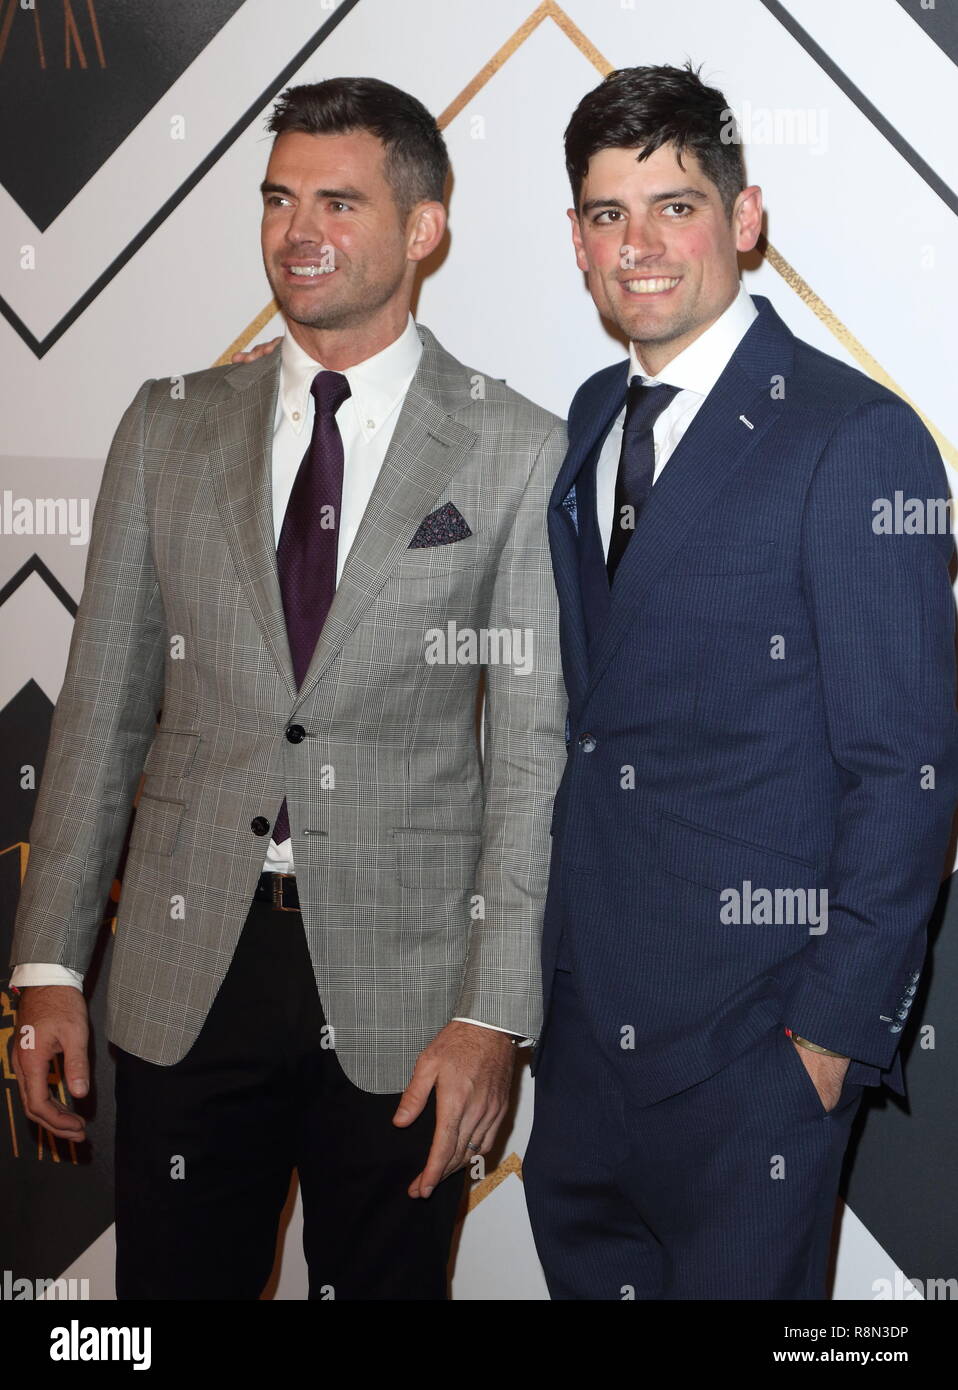 Jimmy Anderson and Alistair Cook on the red carpet at the BBC Sports Personality Of The Year 2018 at the Resorts World Arena. Stock Photo